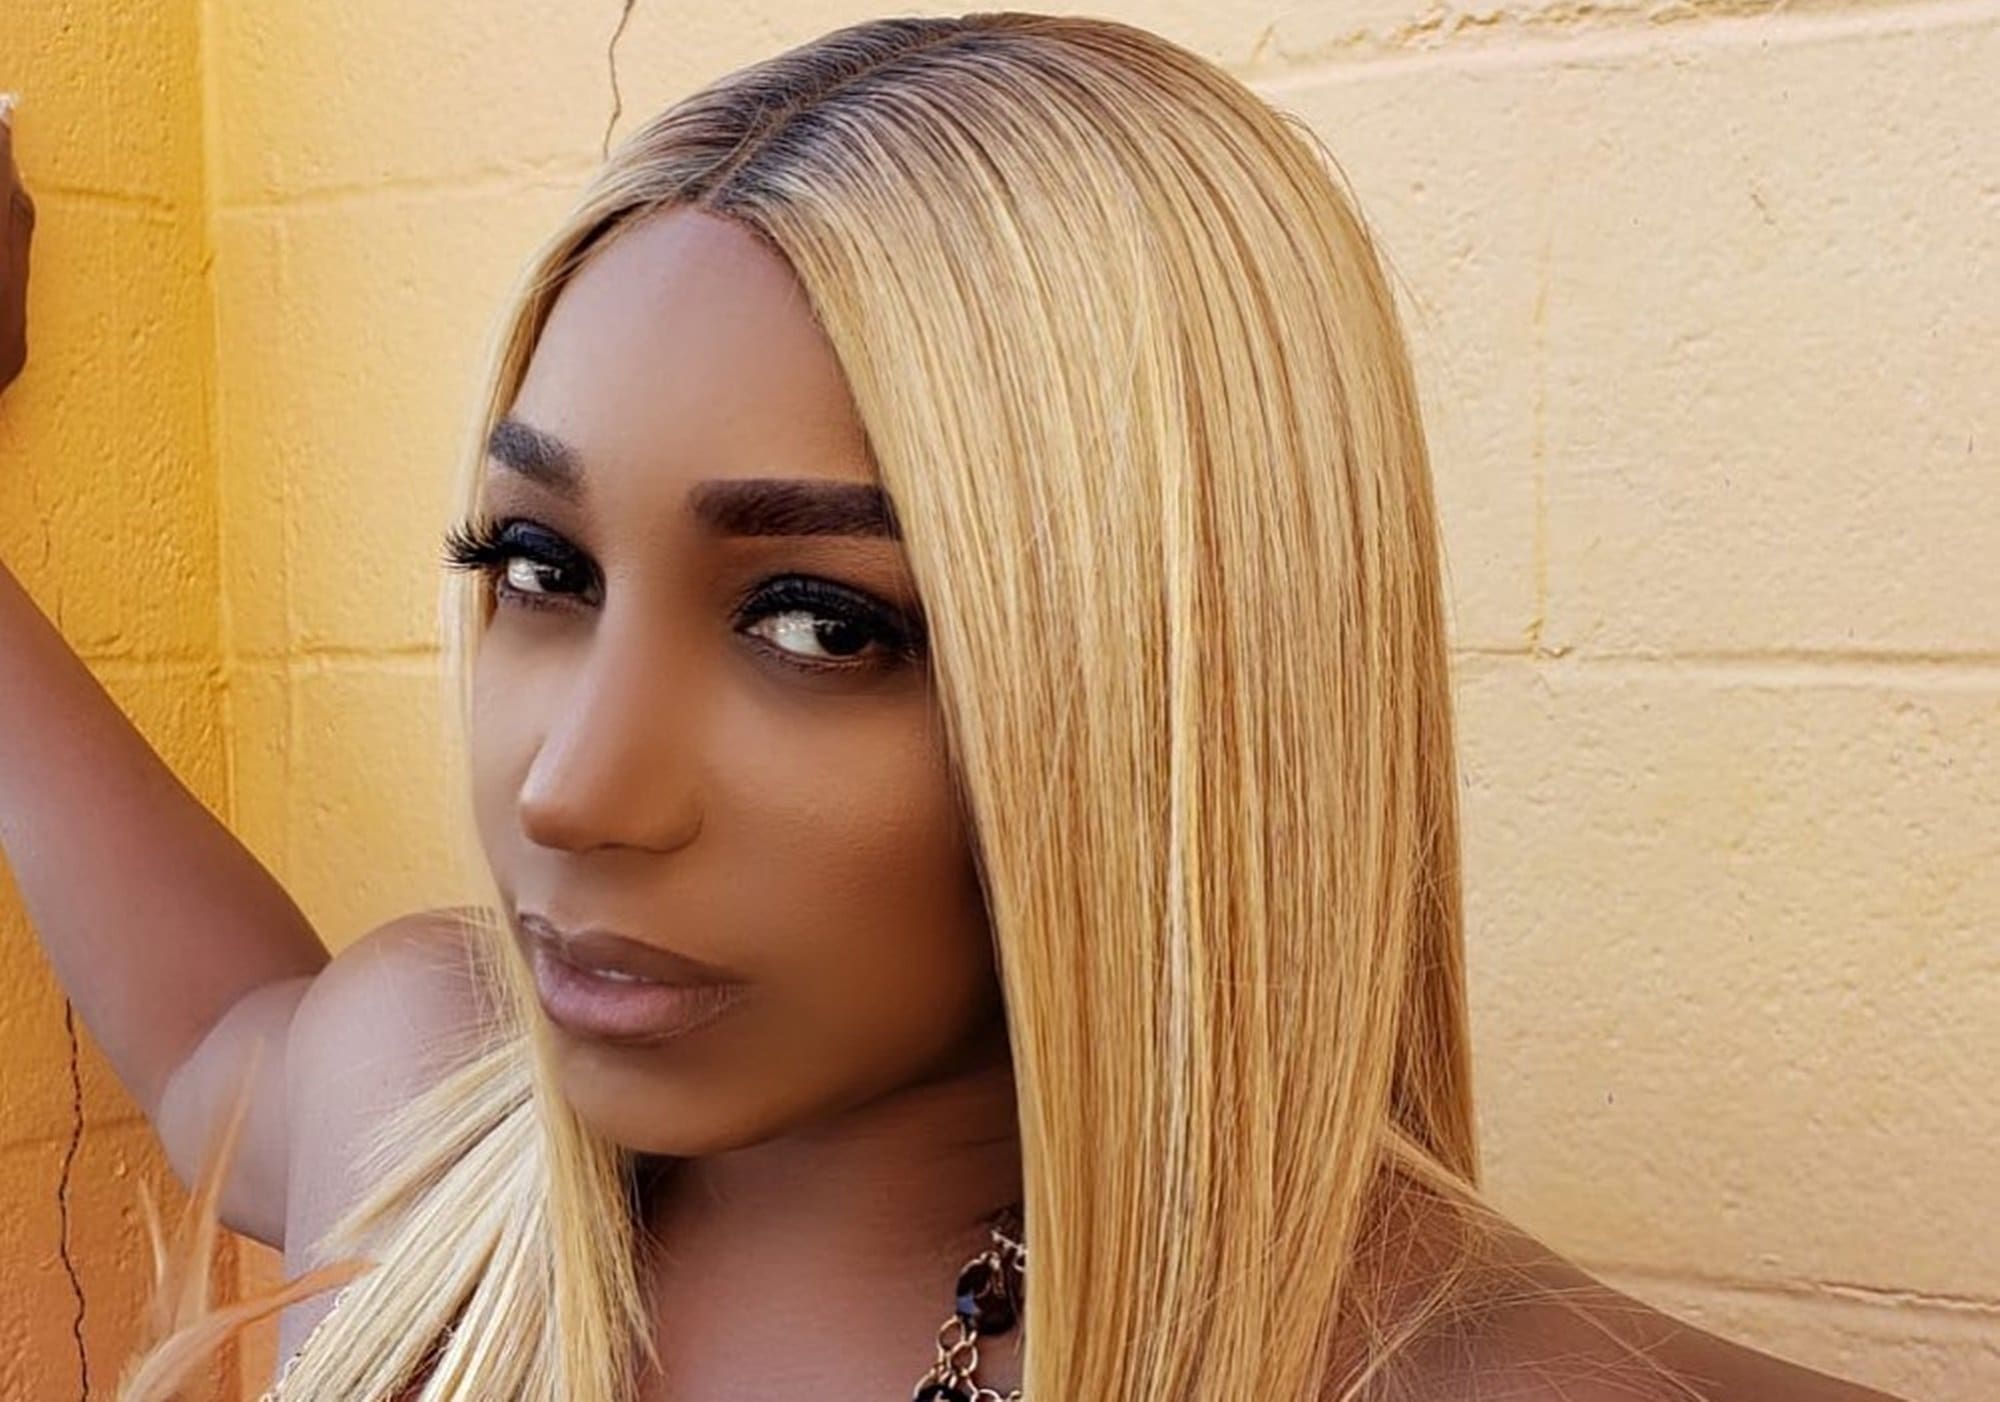 NeNe Leakes Poses In A Fendi Outfit But Fans Accuse Her Of 'Wearing' Too Much Photoshop!